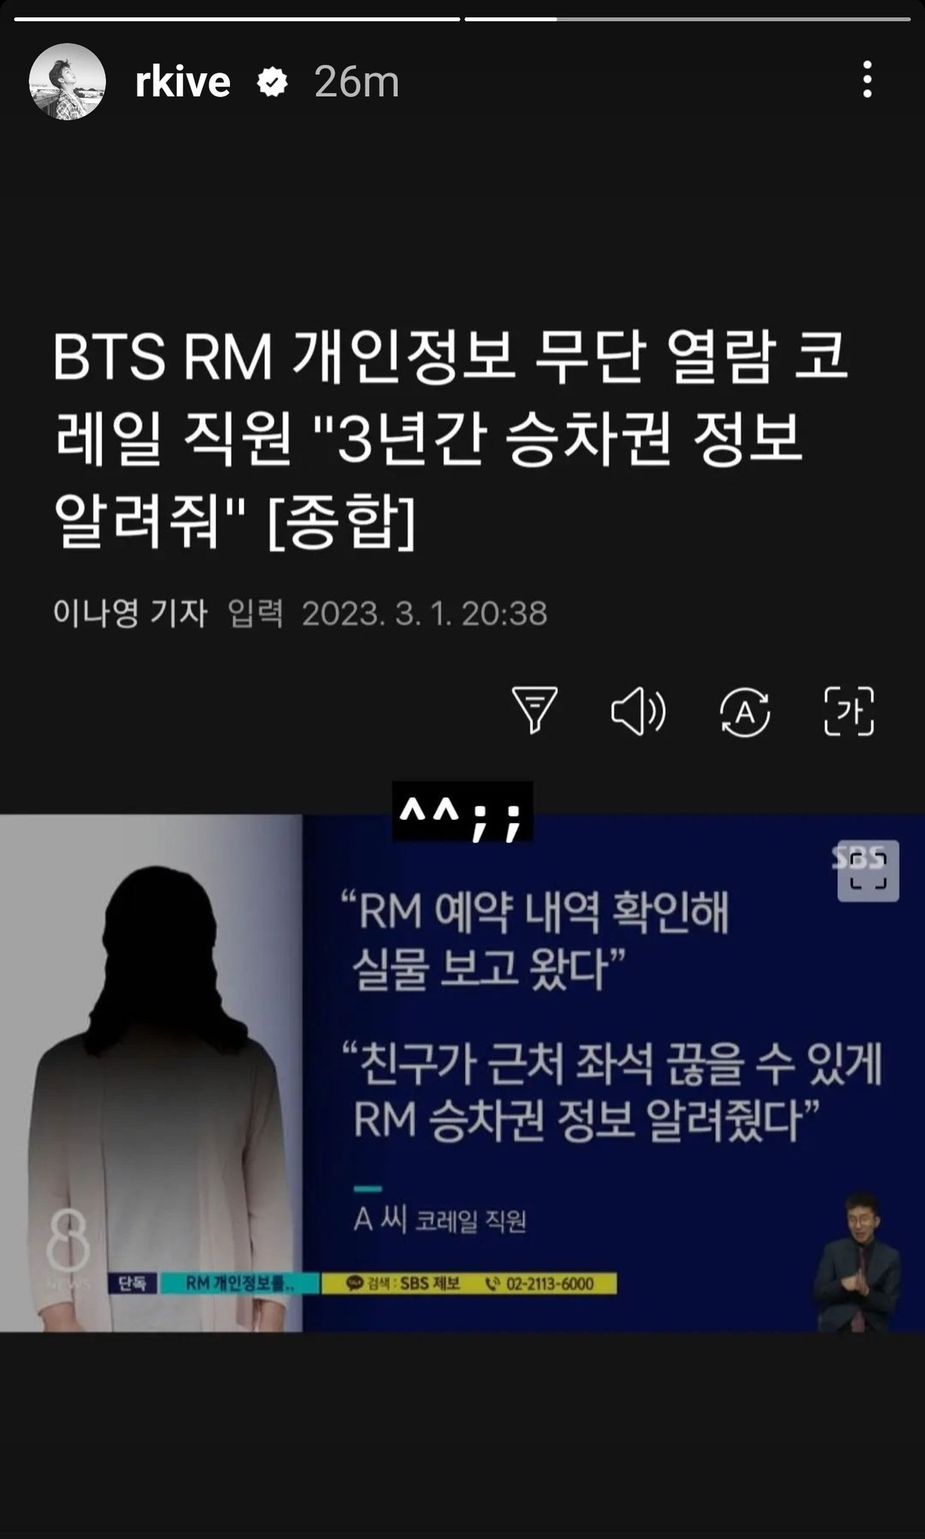 Headline title “Korail Employee Who Released Unauthorized Personal Information of BTS RM ‘Leaked Ticket Information For 3 Years”| @rkive/Instagram